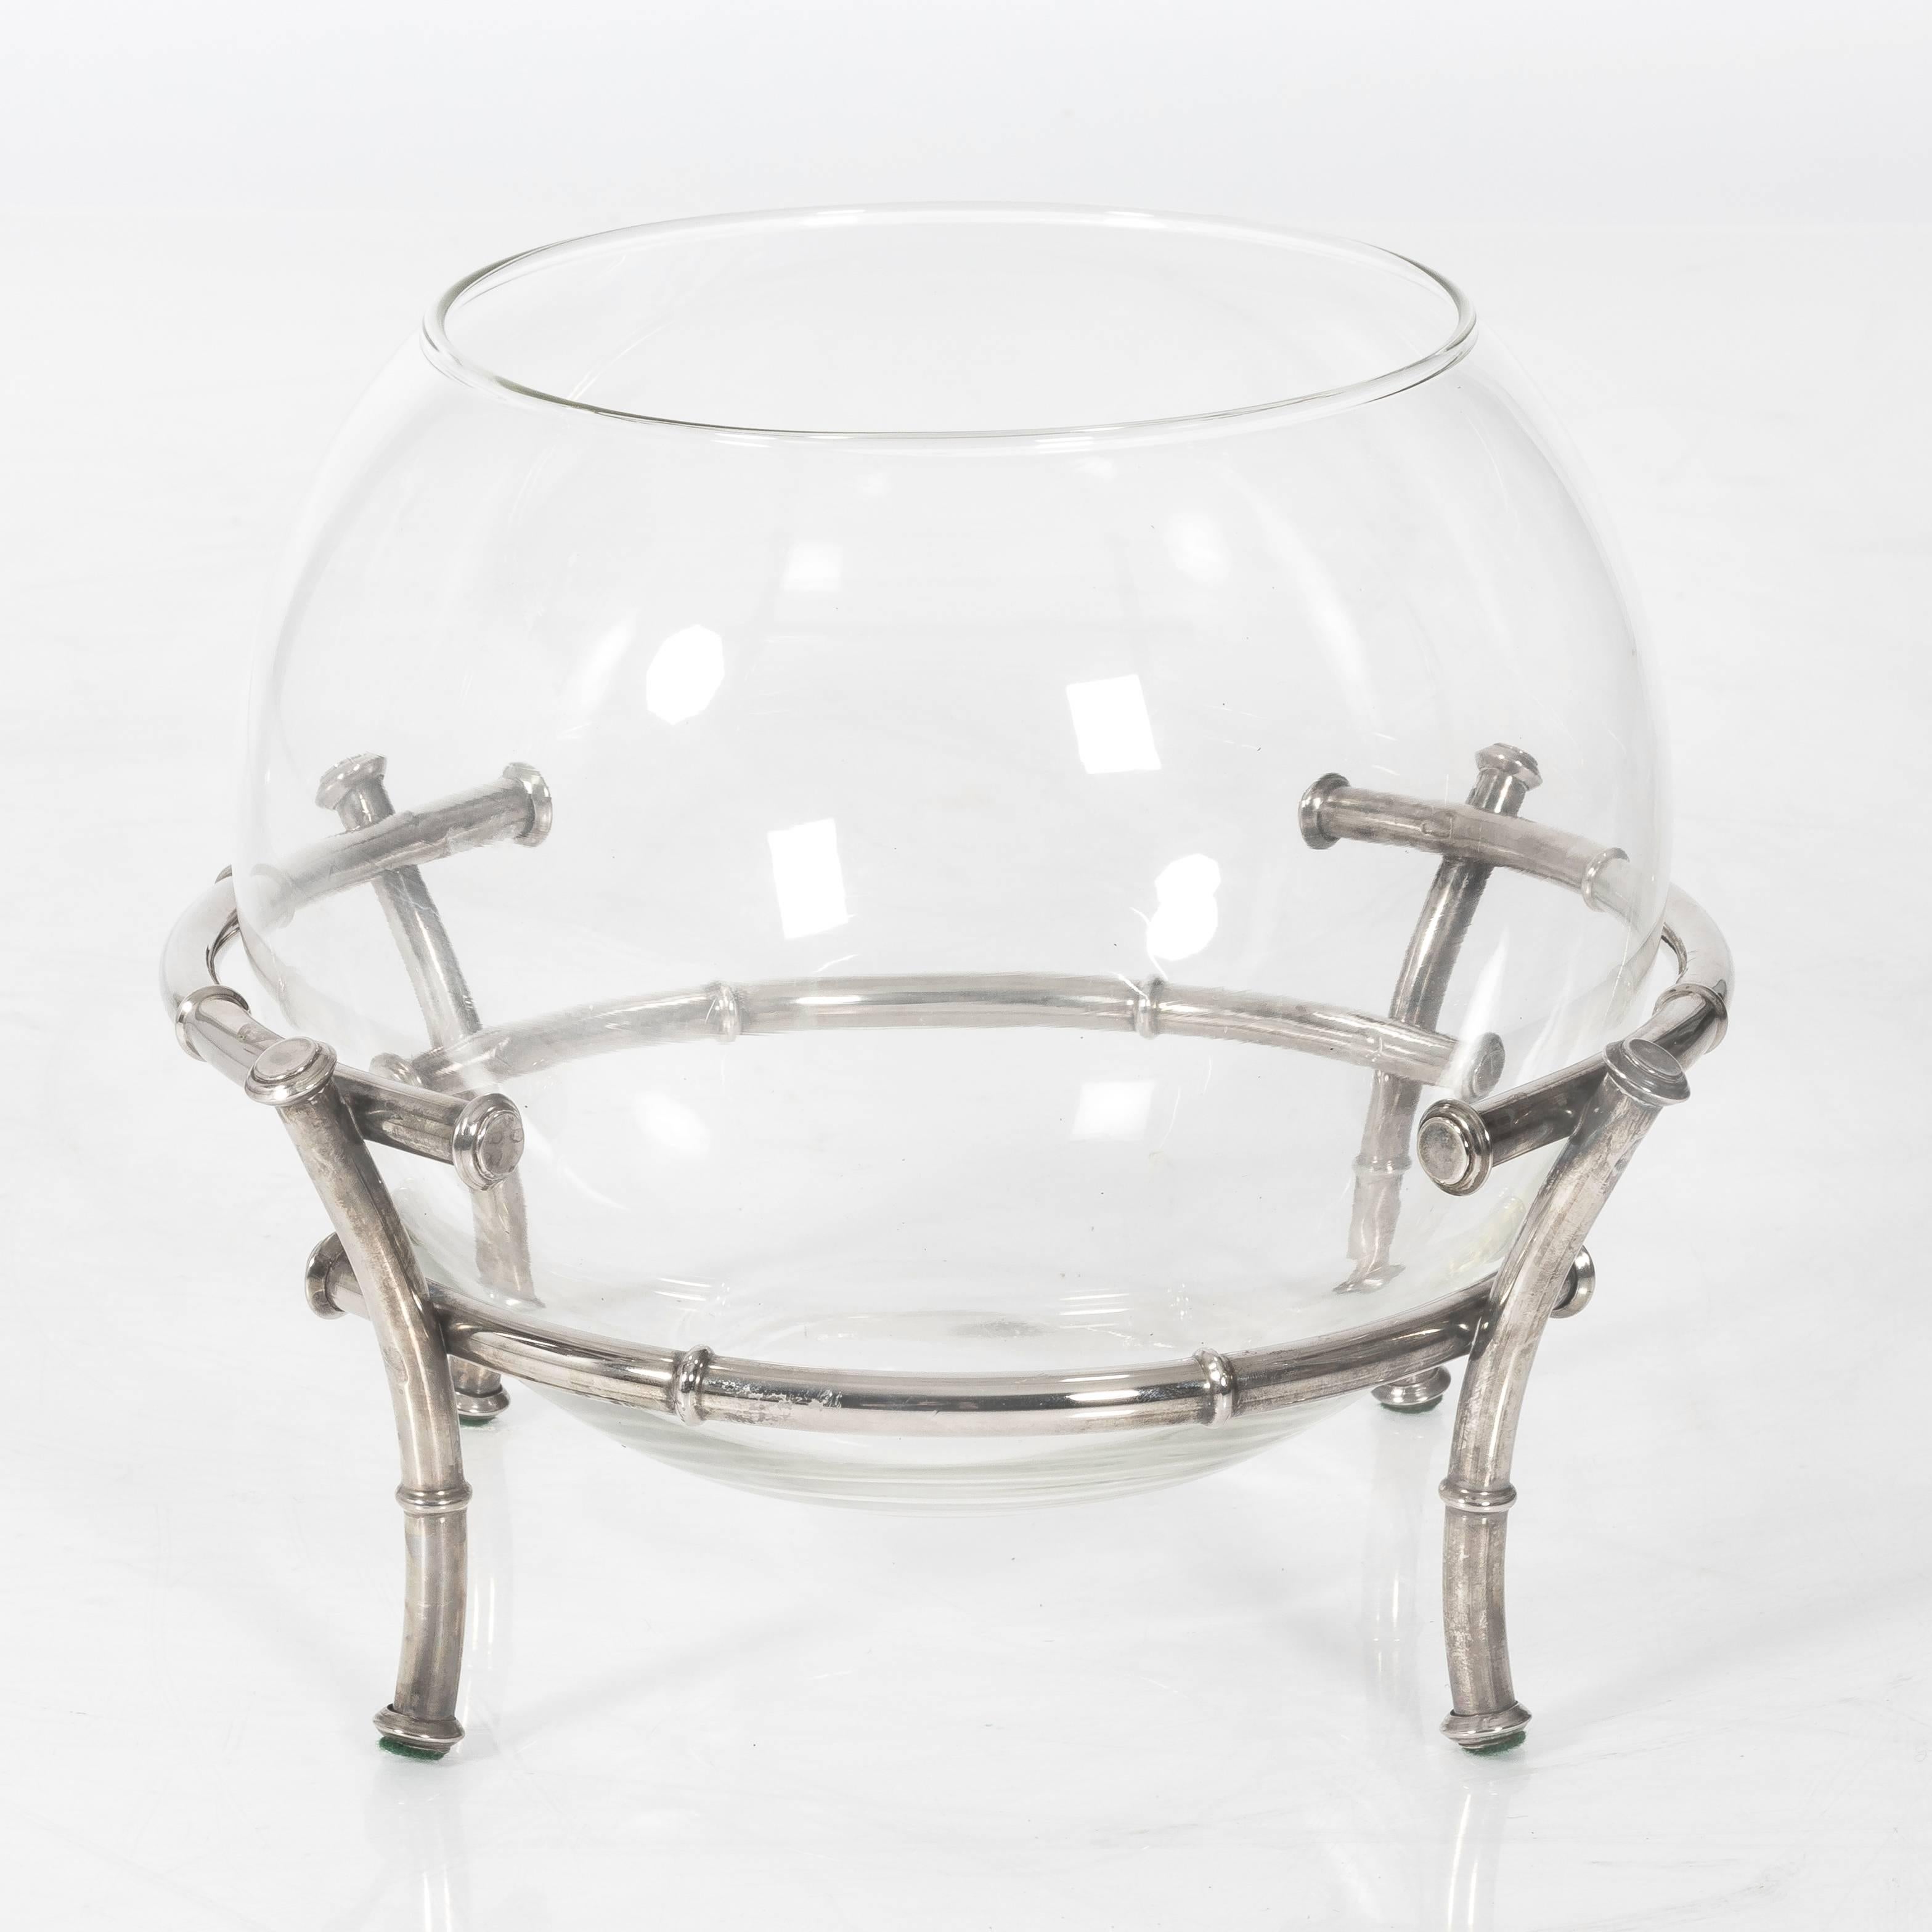 Large glass punch bowl with silver plate bamboo-style base. Coordinating 14